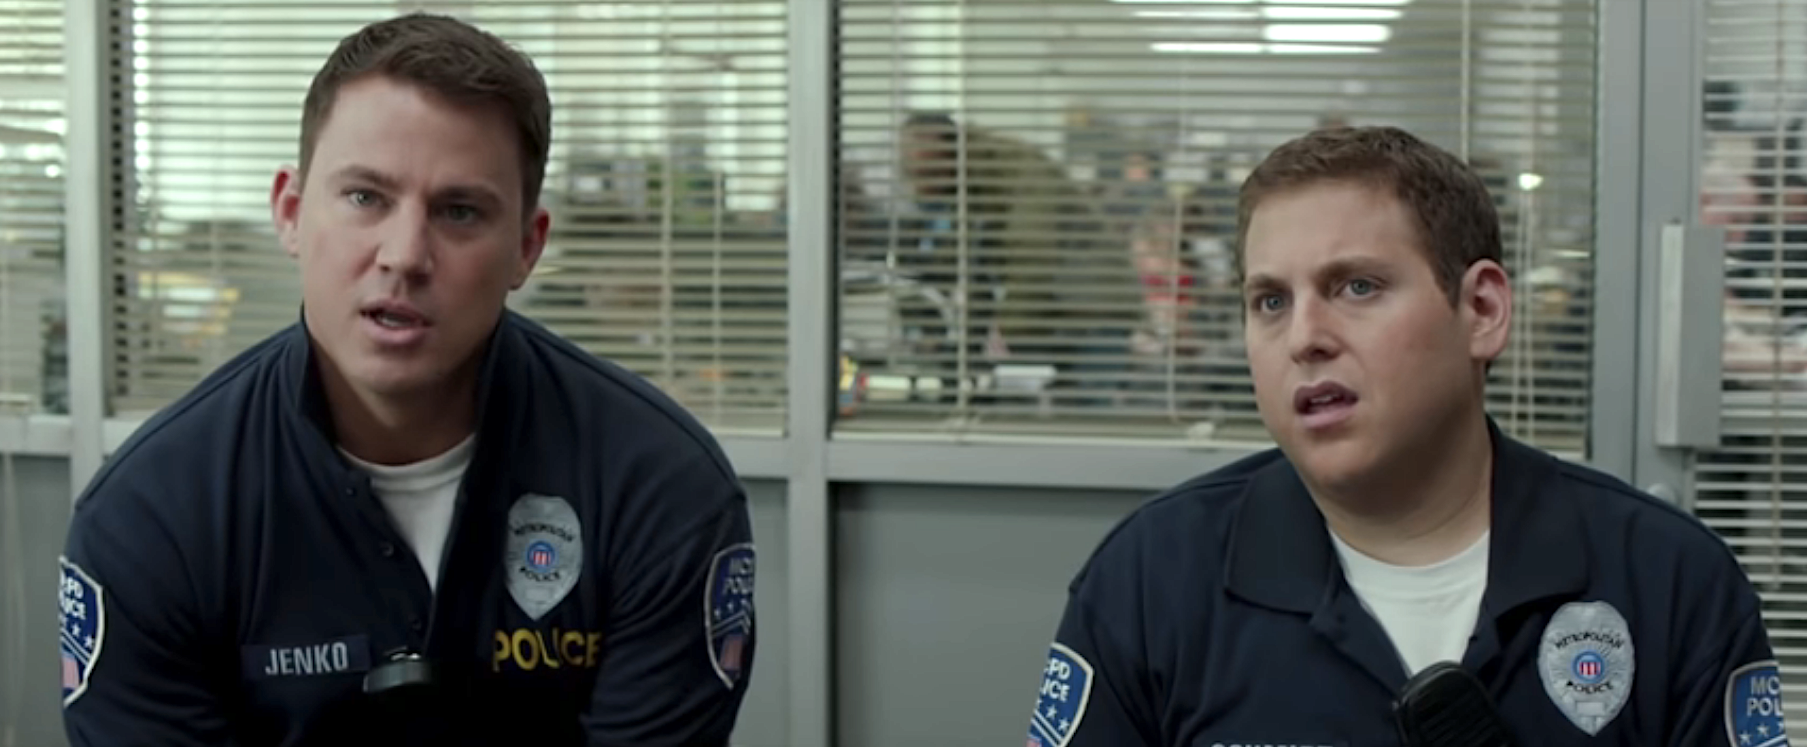 Channing Tatum and Jonah Hill as cops